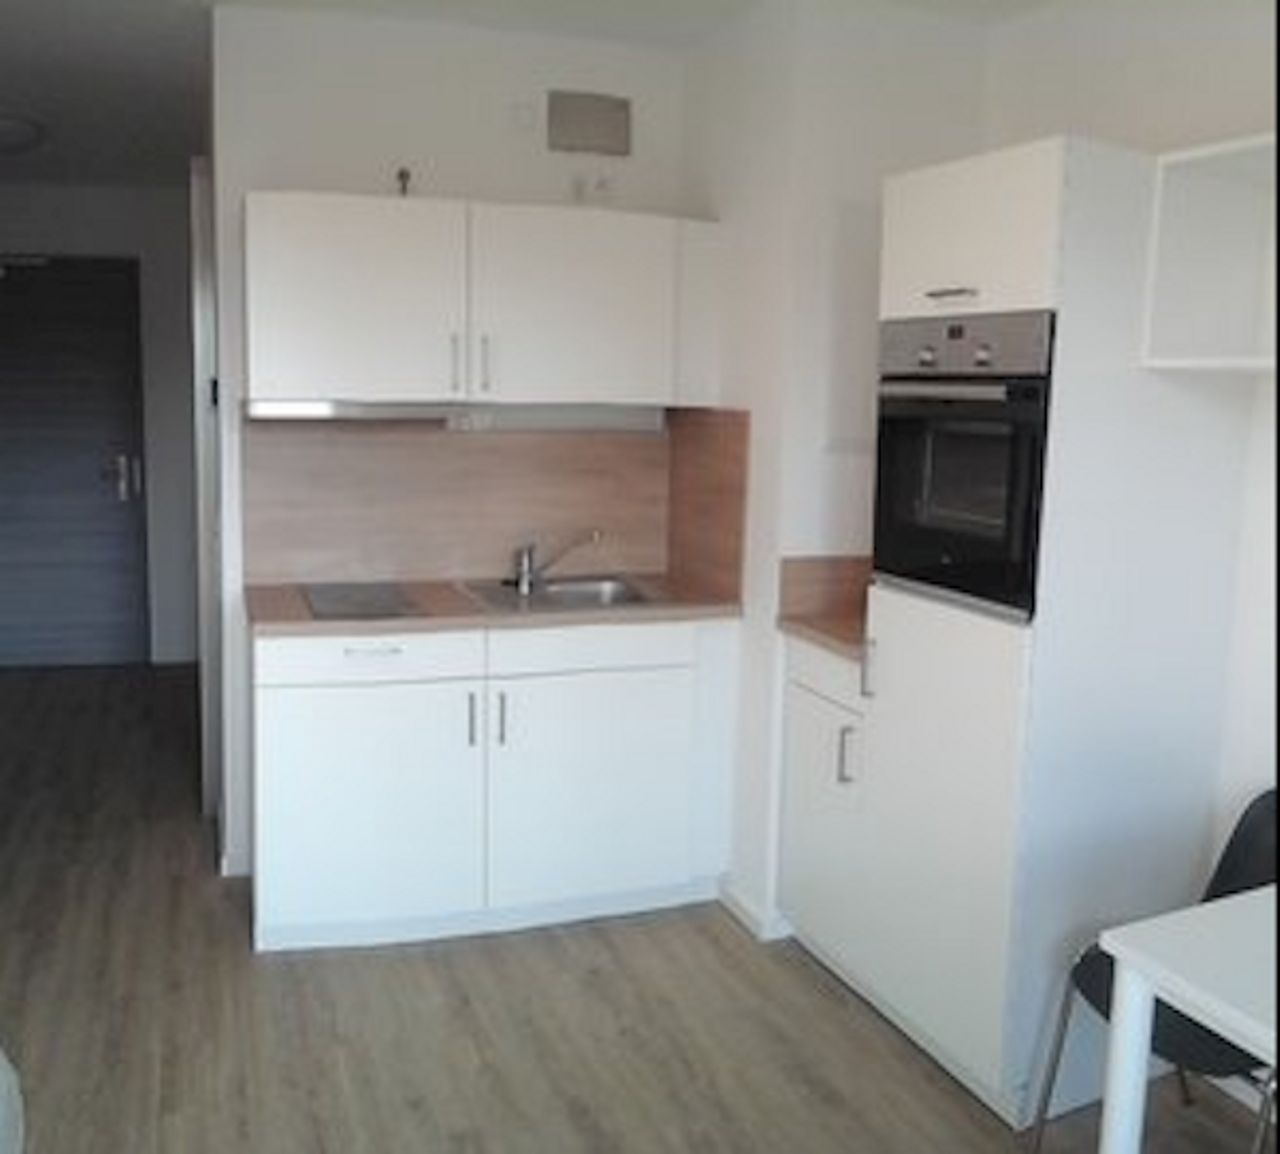 Centrally located single apartment with a balcony, accessible/ barrier-free